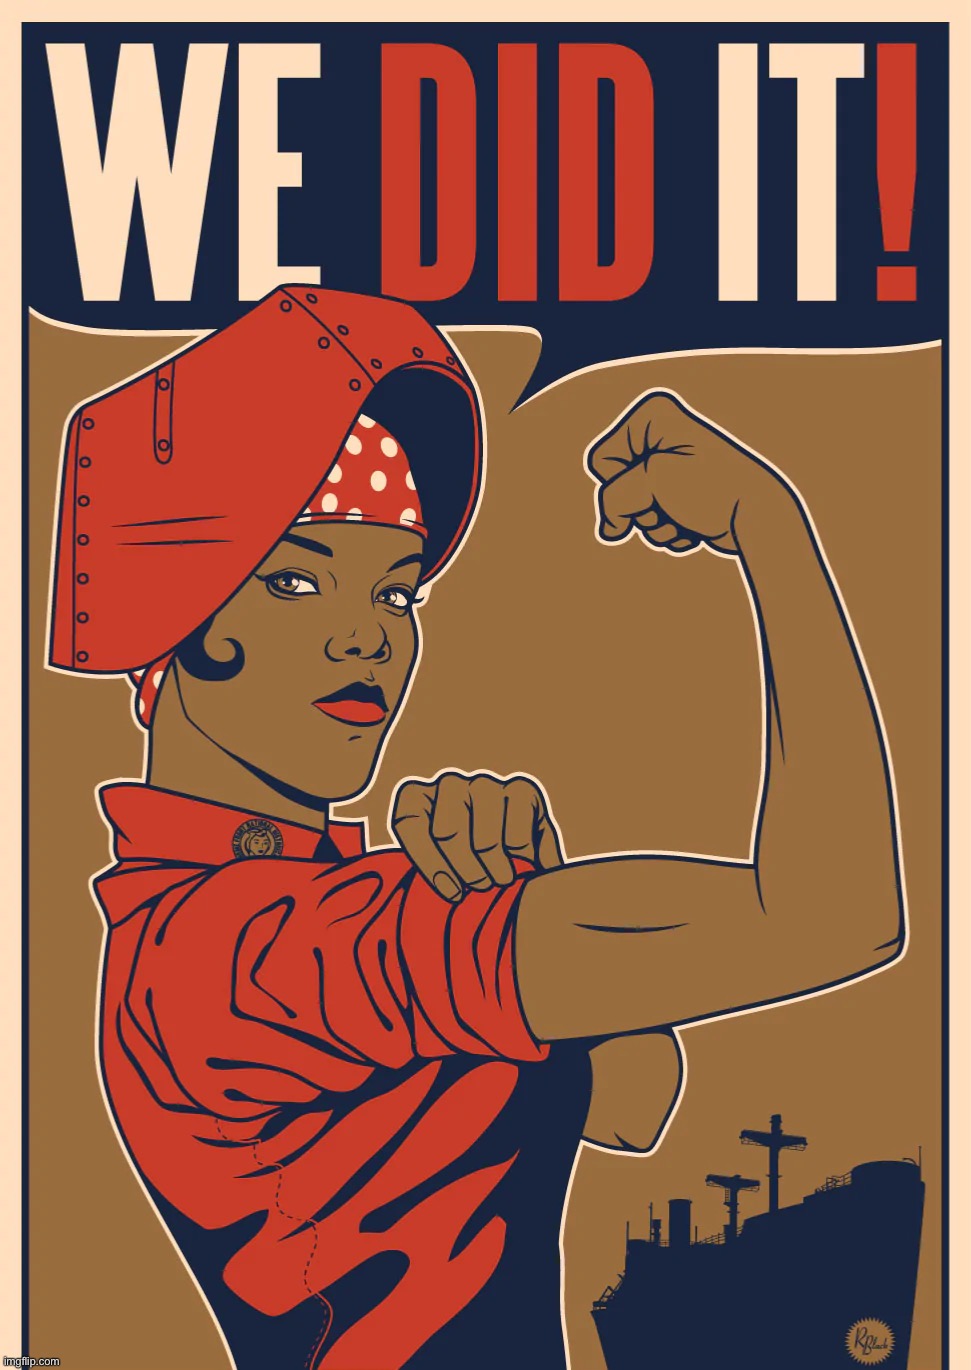 Women stood up in this election. | image tagged in rosie the riveter we did it,women,feminism,gender equality,womens rights,midterms | made w/ Imgflip meme maker